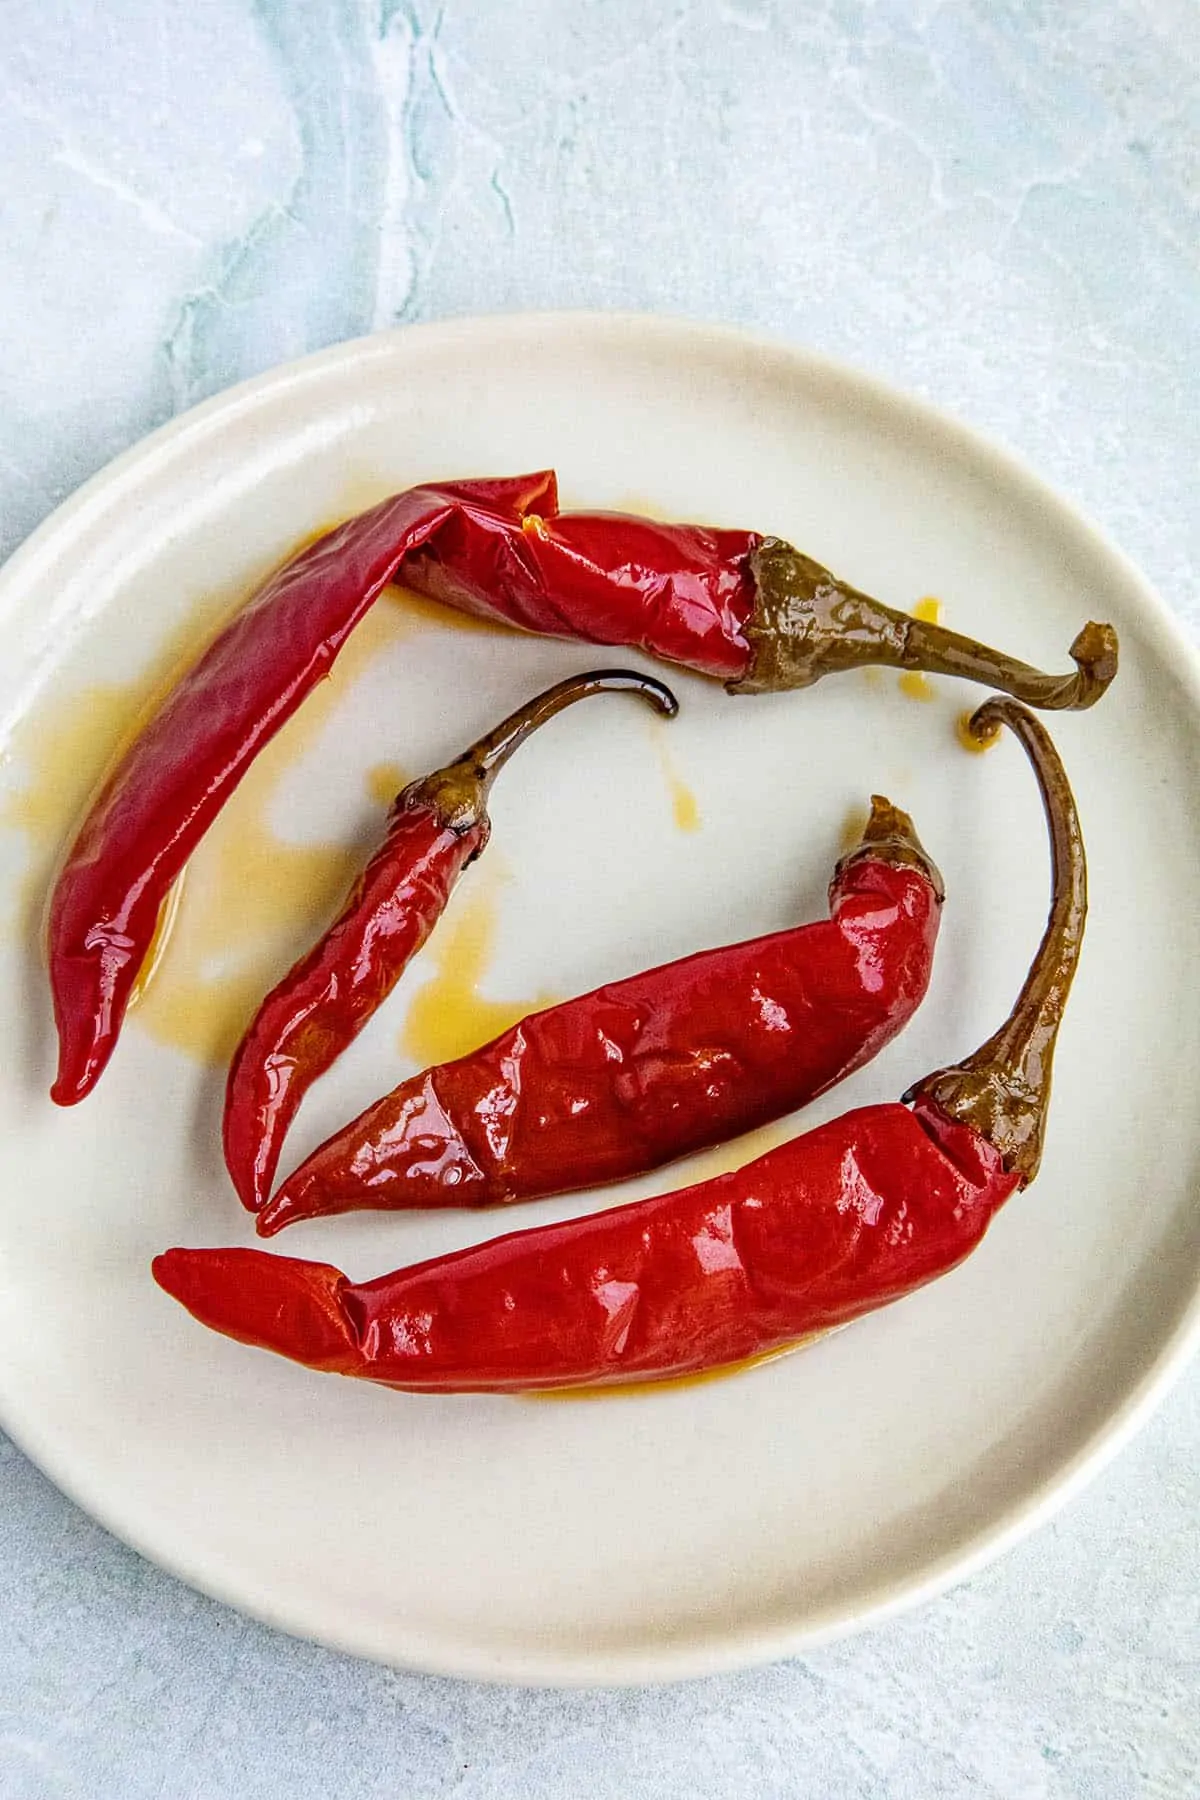 Calabrian Chili: Spicy Italian Peppers